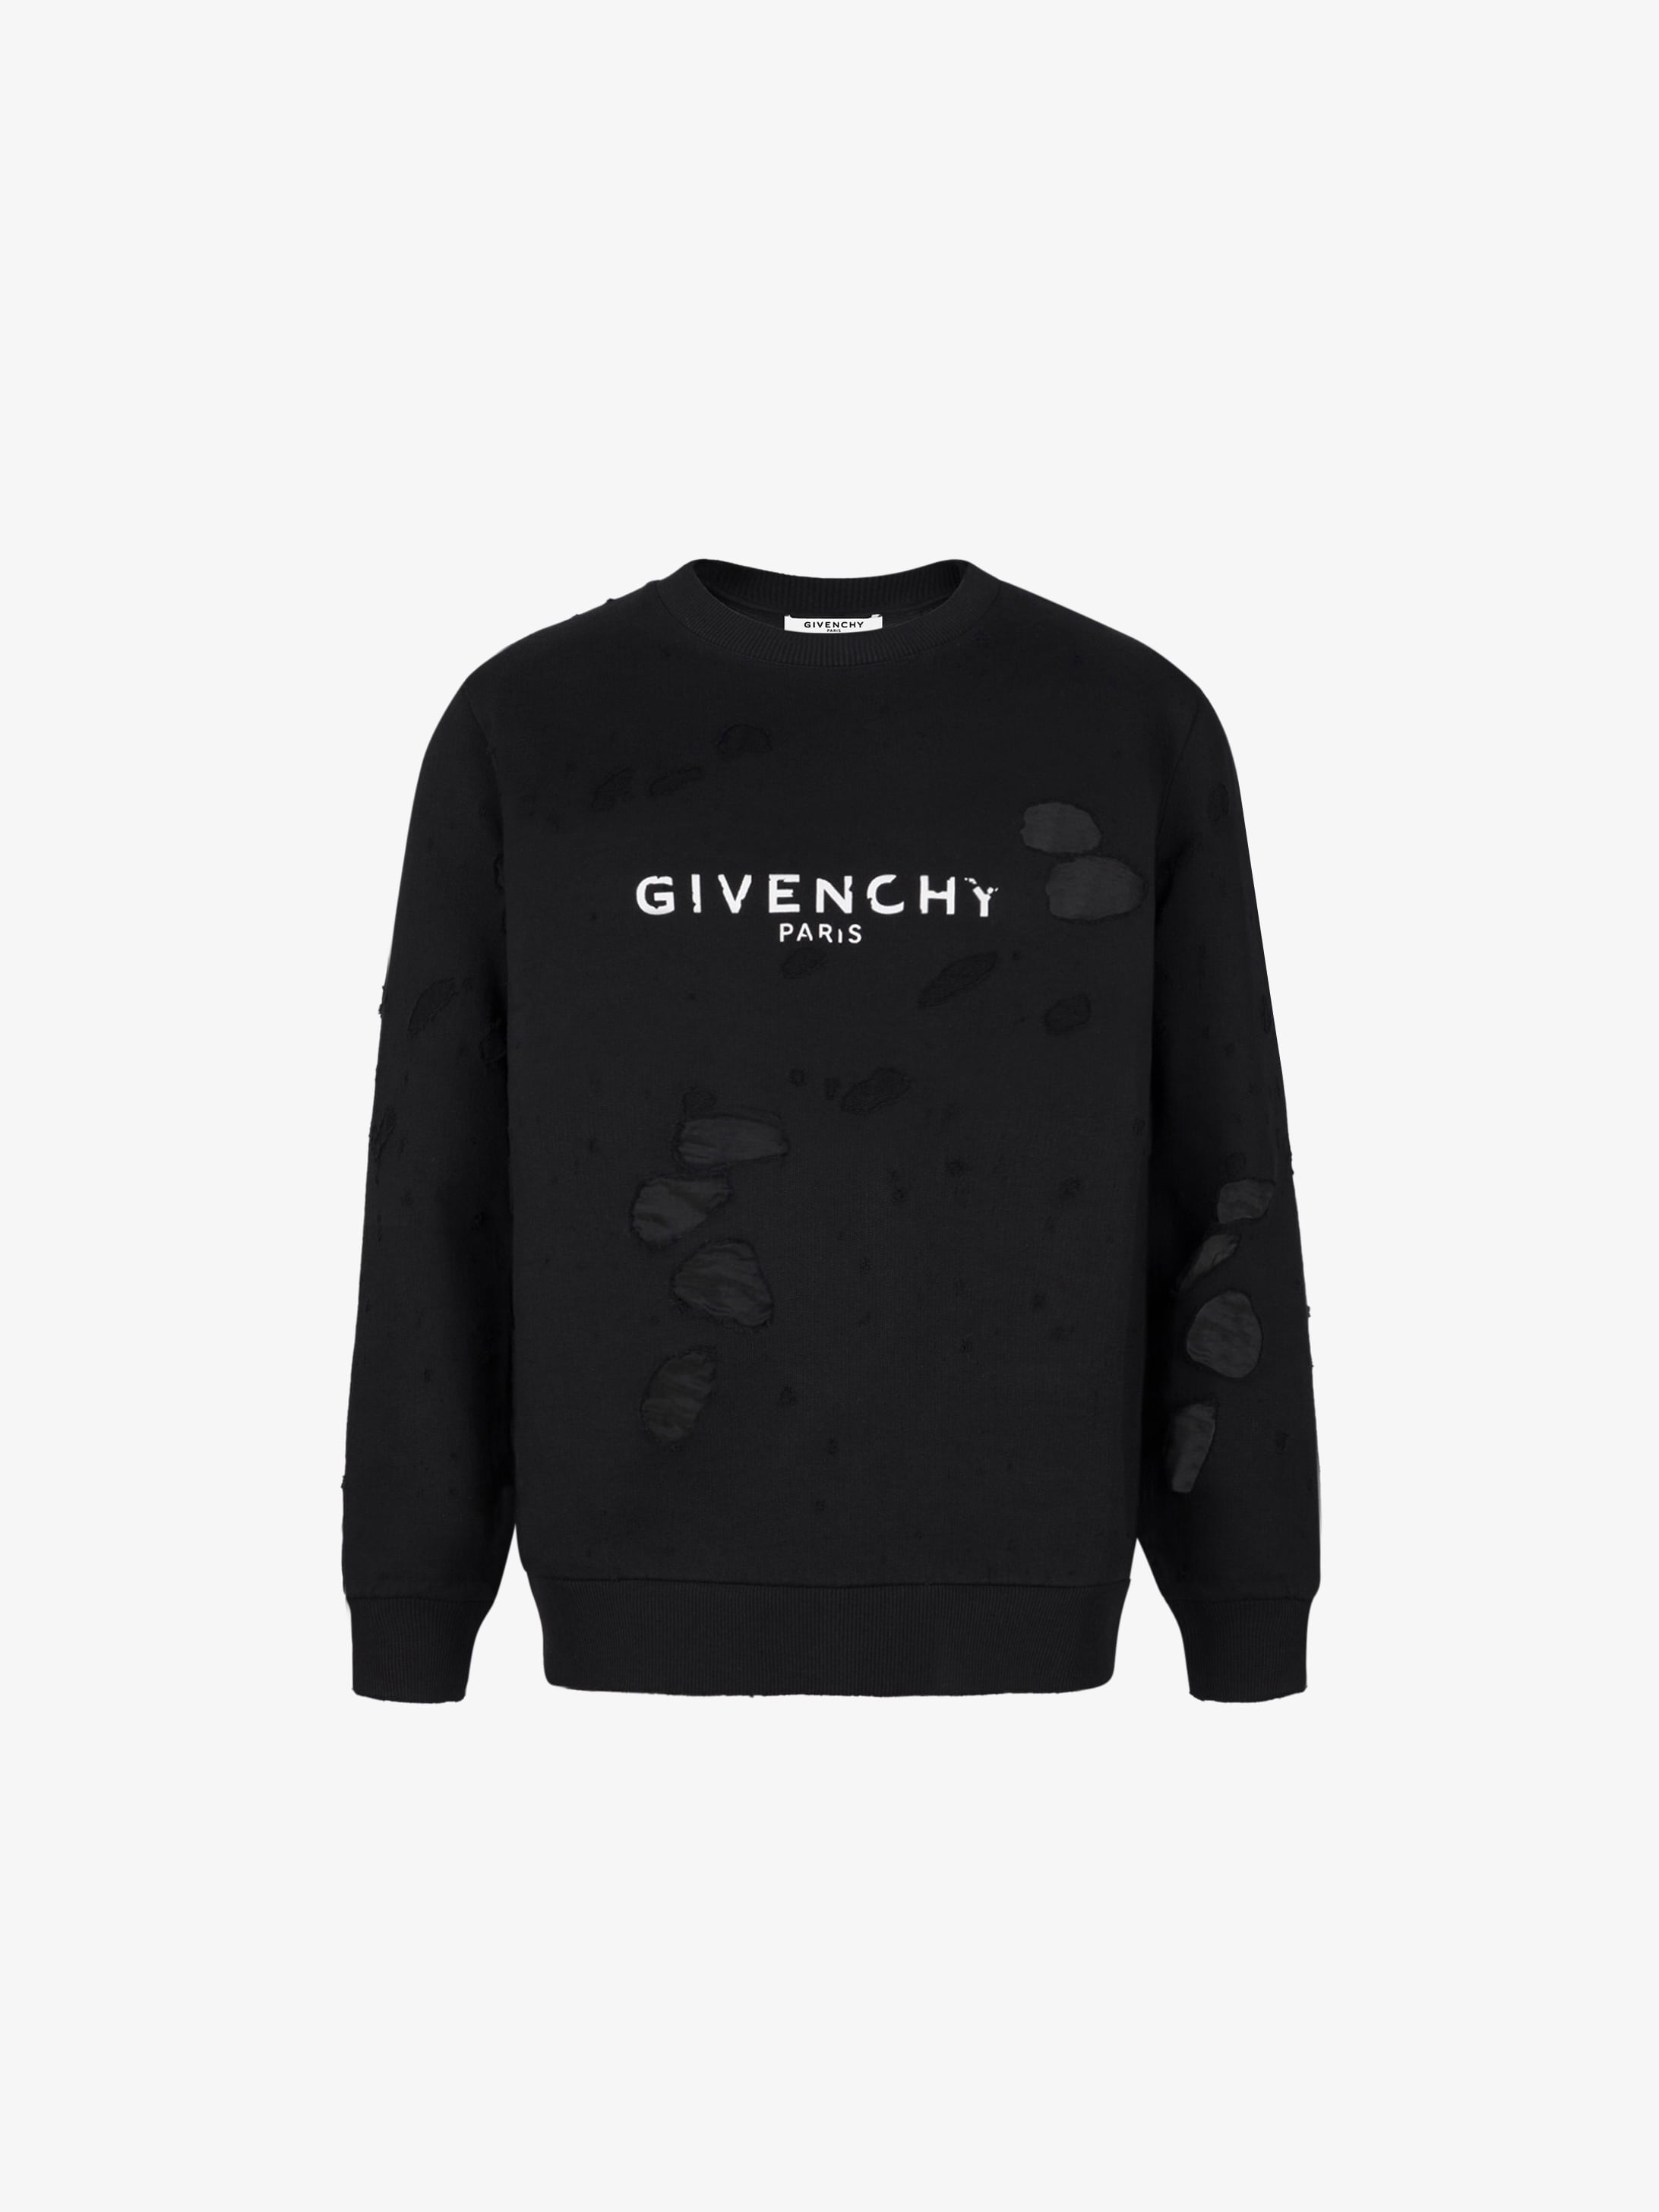 black and white givenchy jumper